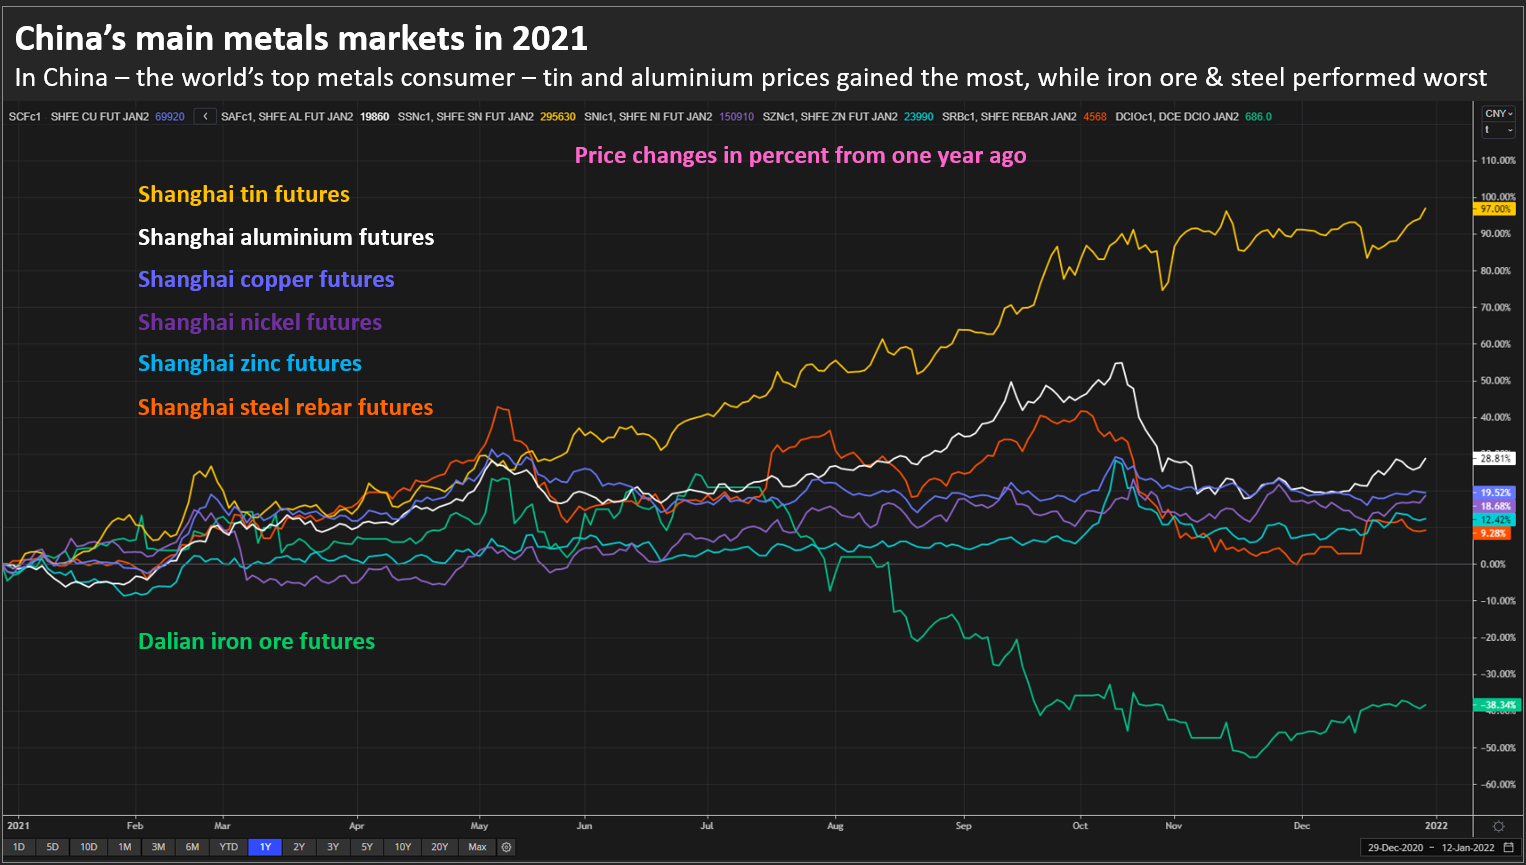 China’s main metals markets in 2021